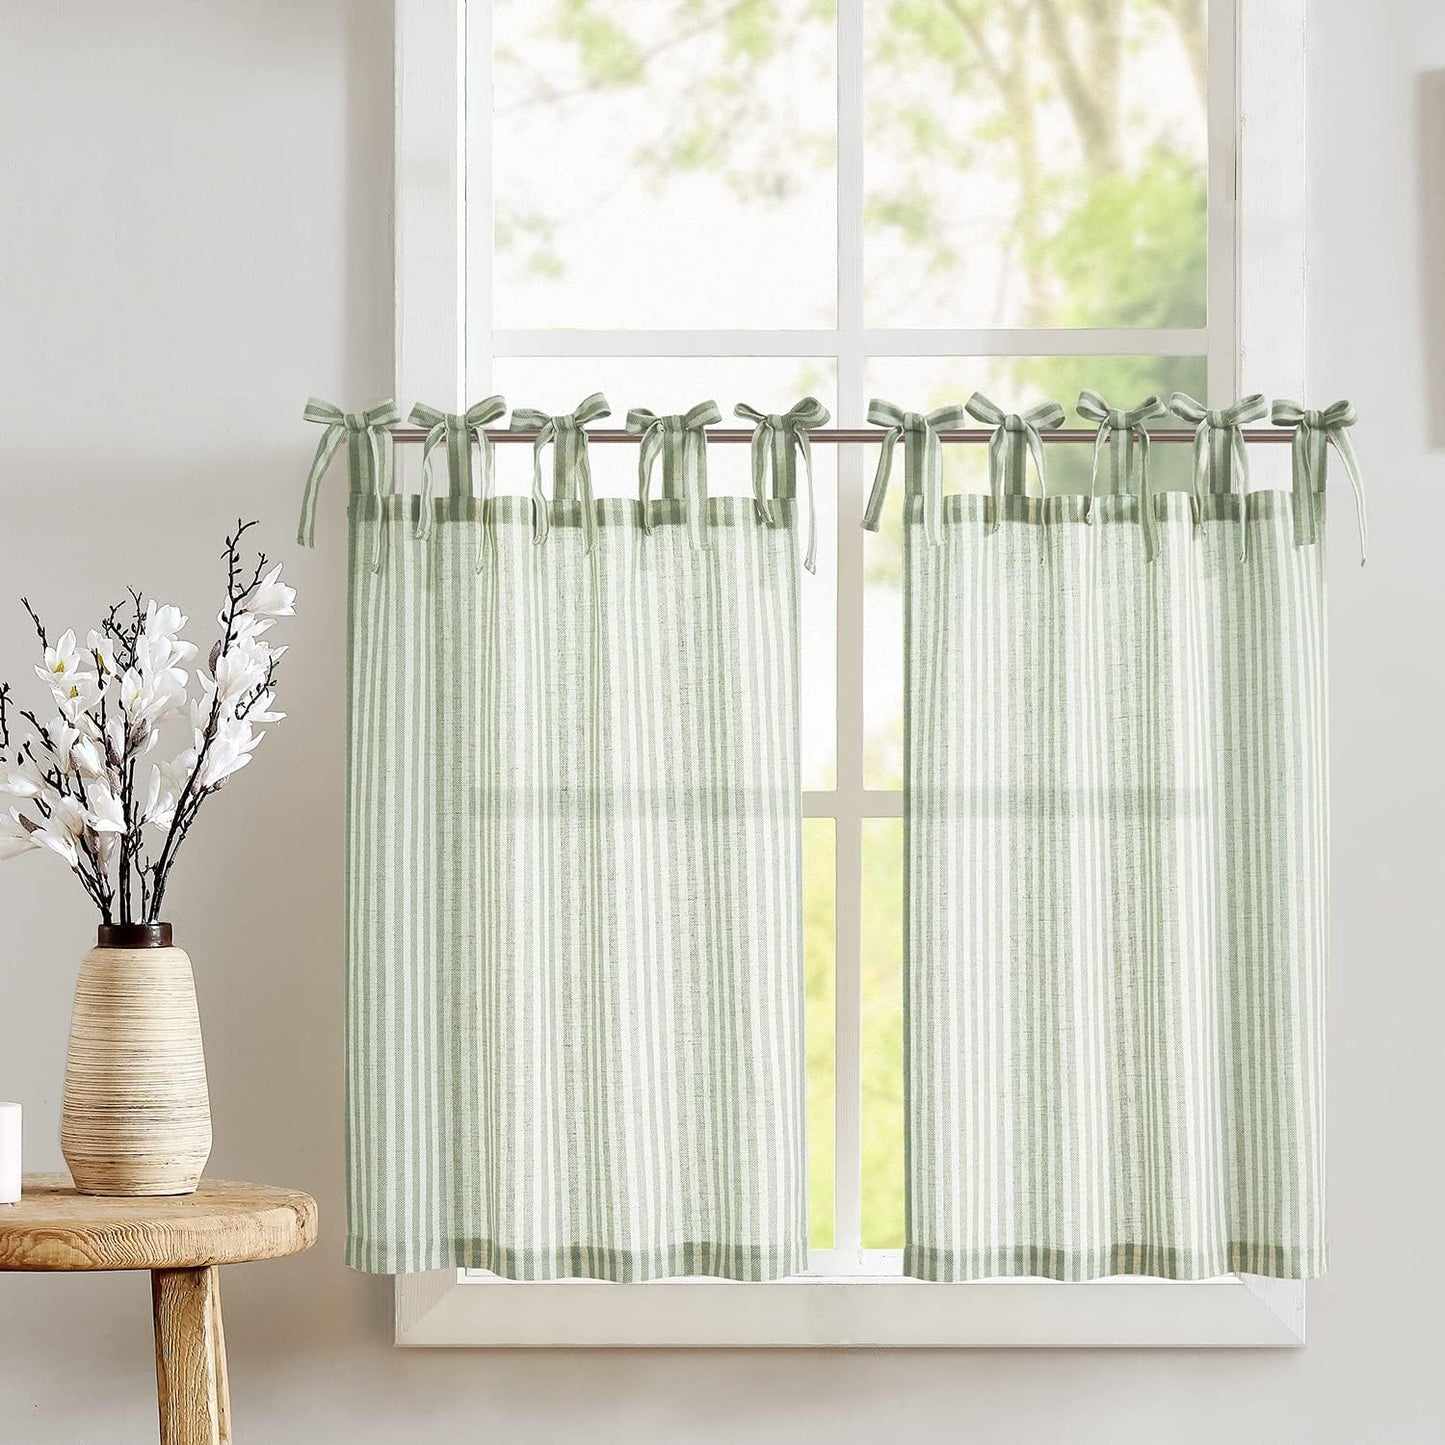 Jinchan Linen Kitchen Curtains Striped Tier Curtains Ticking Stripe Curtains Pinstripe Cafe Curtains 24 Inch Length for Living Room Bathroom Farmhouse Rustic Curtains Rod Pocket 2 Panels Tan  CKNY HOME FASHION Tie Top Striped Sage Green W26 X L36 